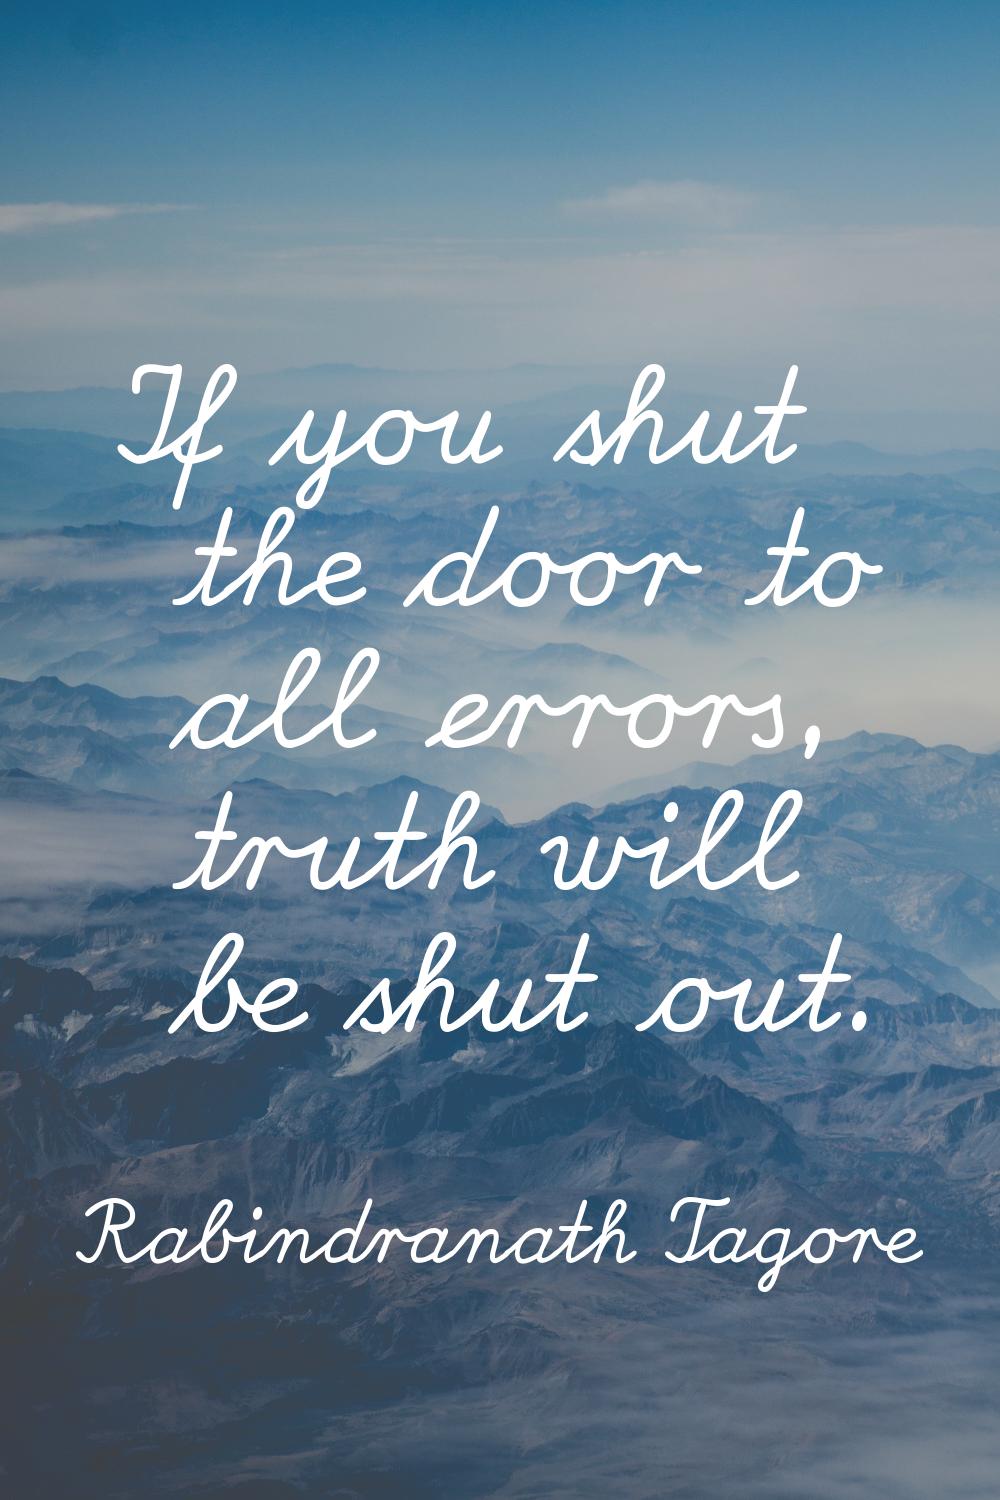 If you shut the door to all errors, truth will be shut out.